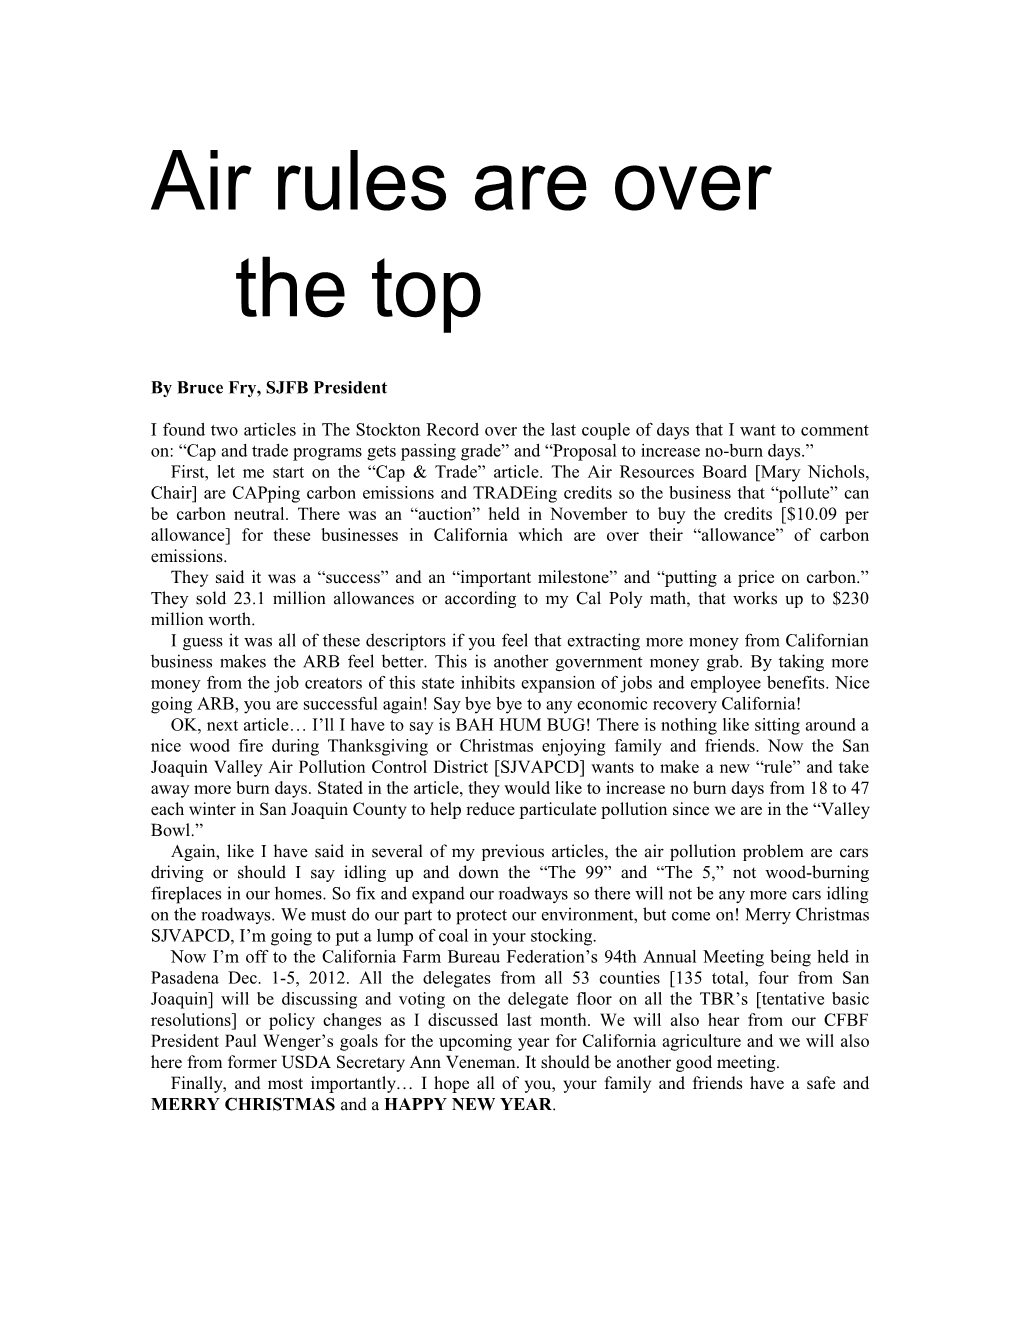 Air Rules Are Over the Top